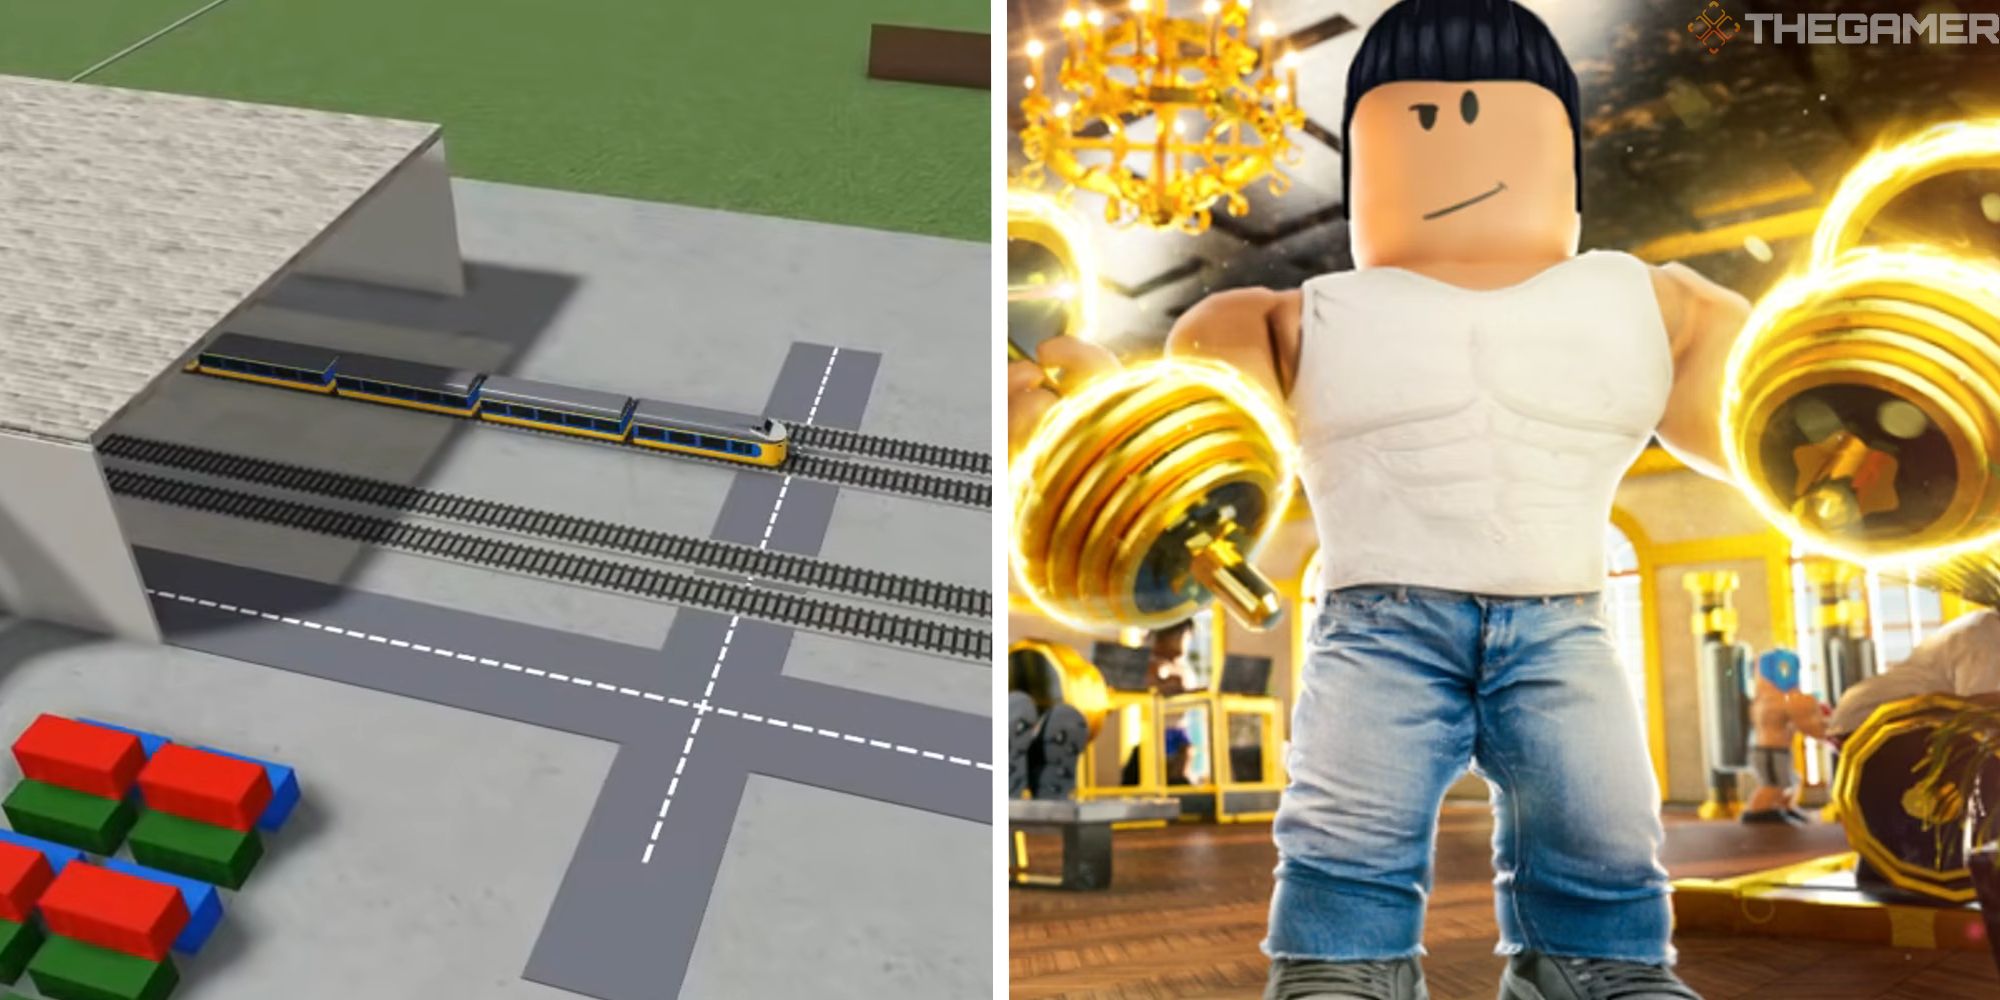 Top 13 Best Roblox Games to play with friends (Roblox Multiplayer games) 